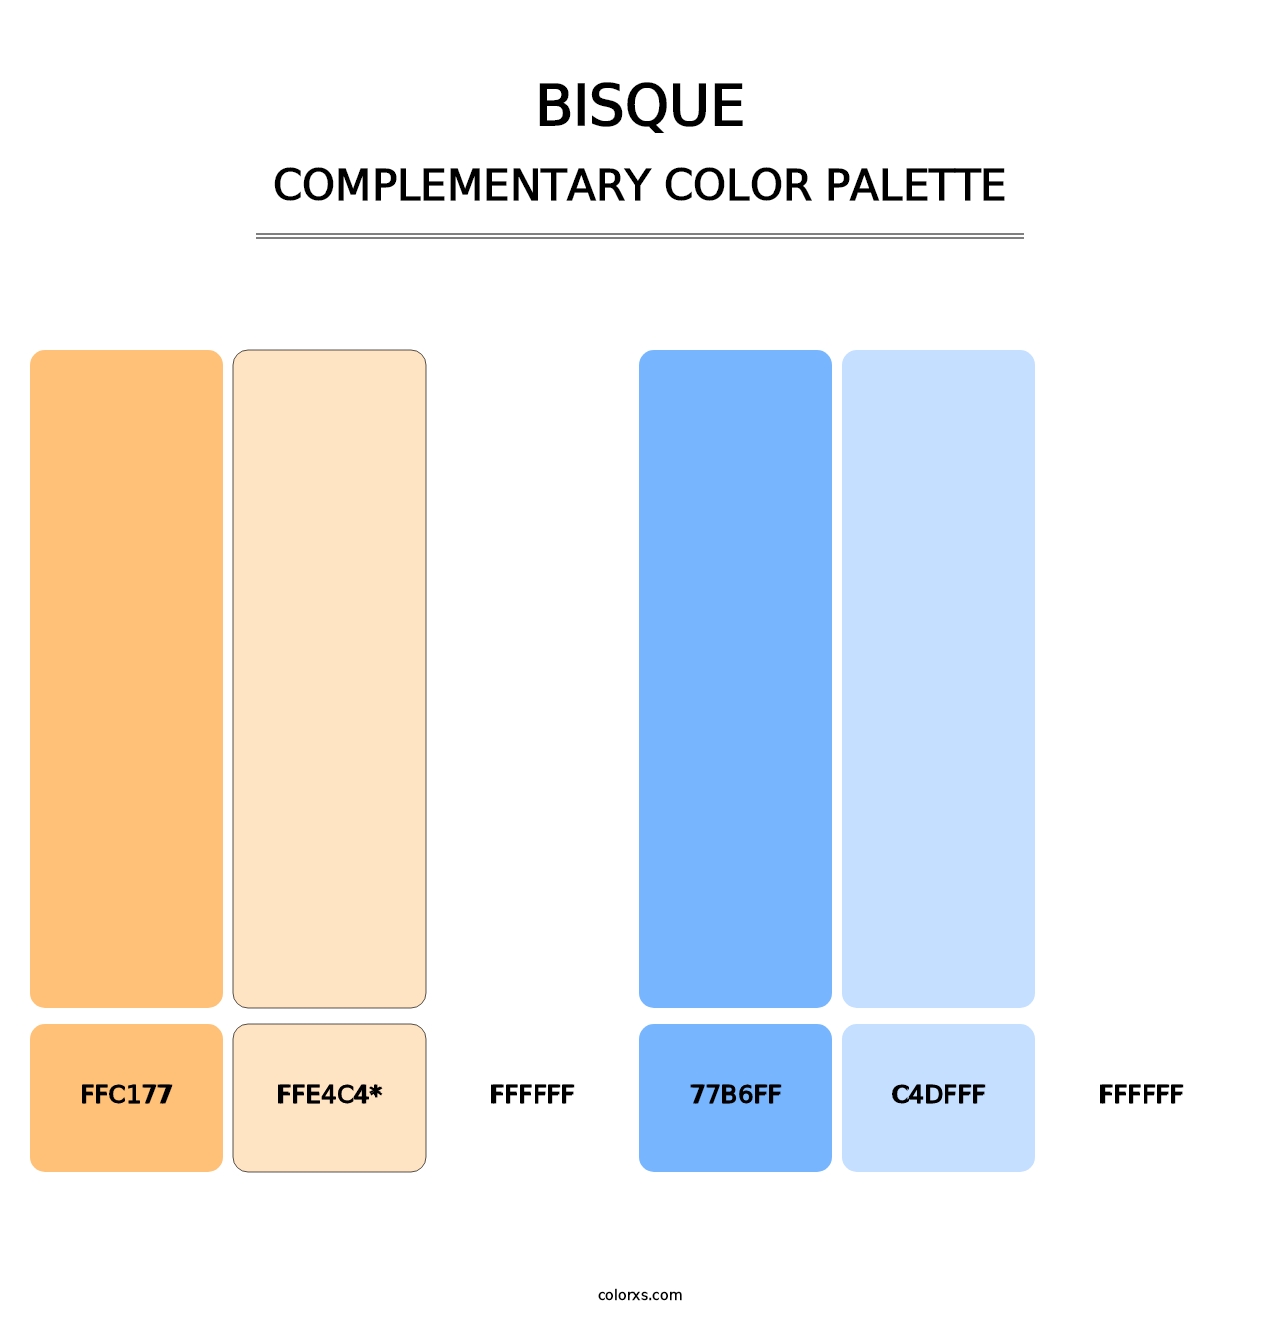 Bisque - Complementary Color Palette